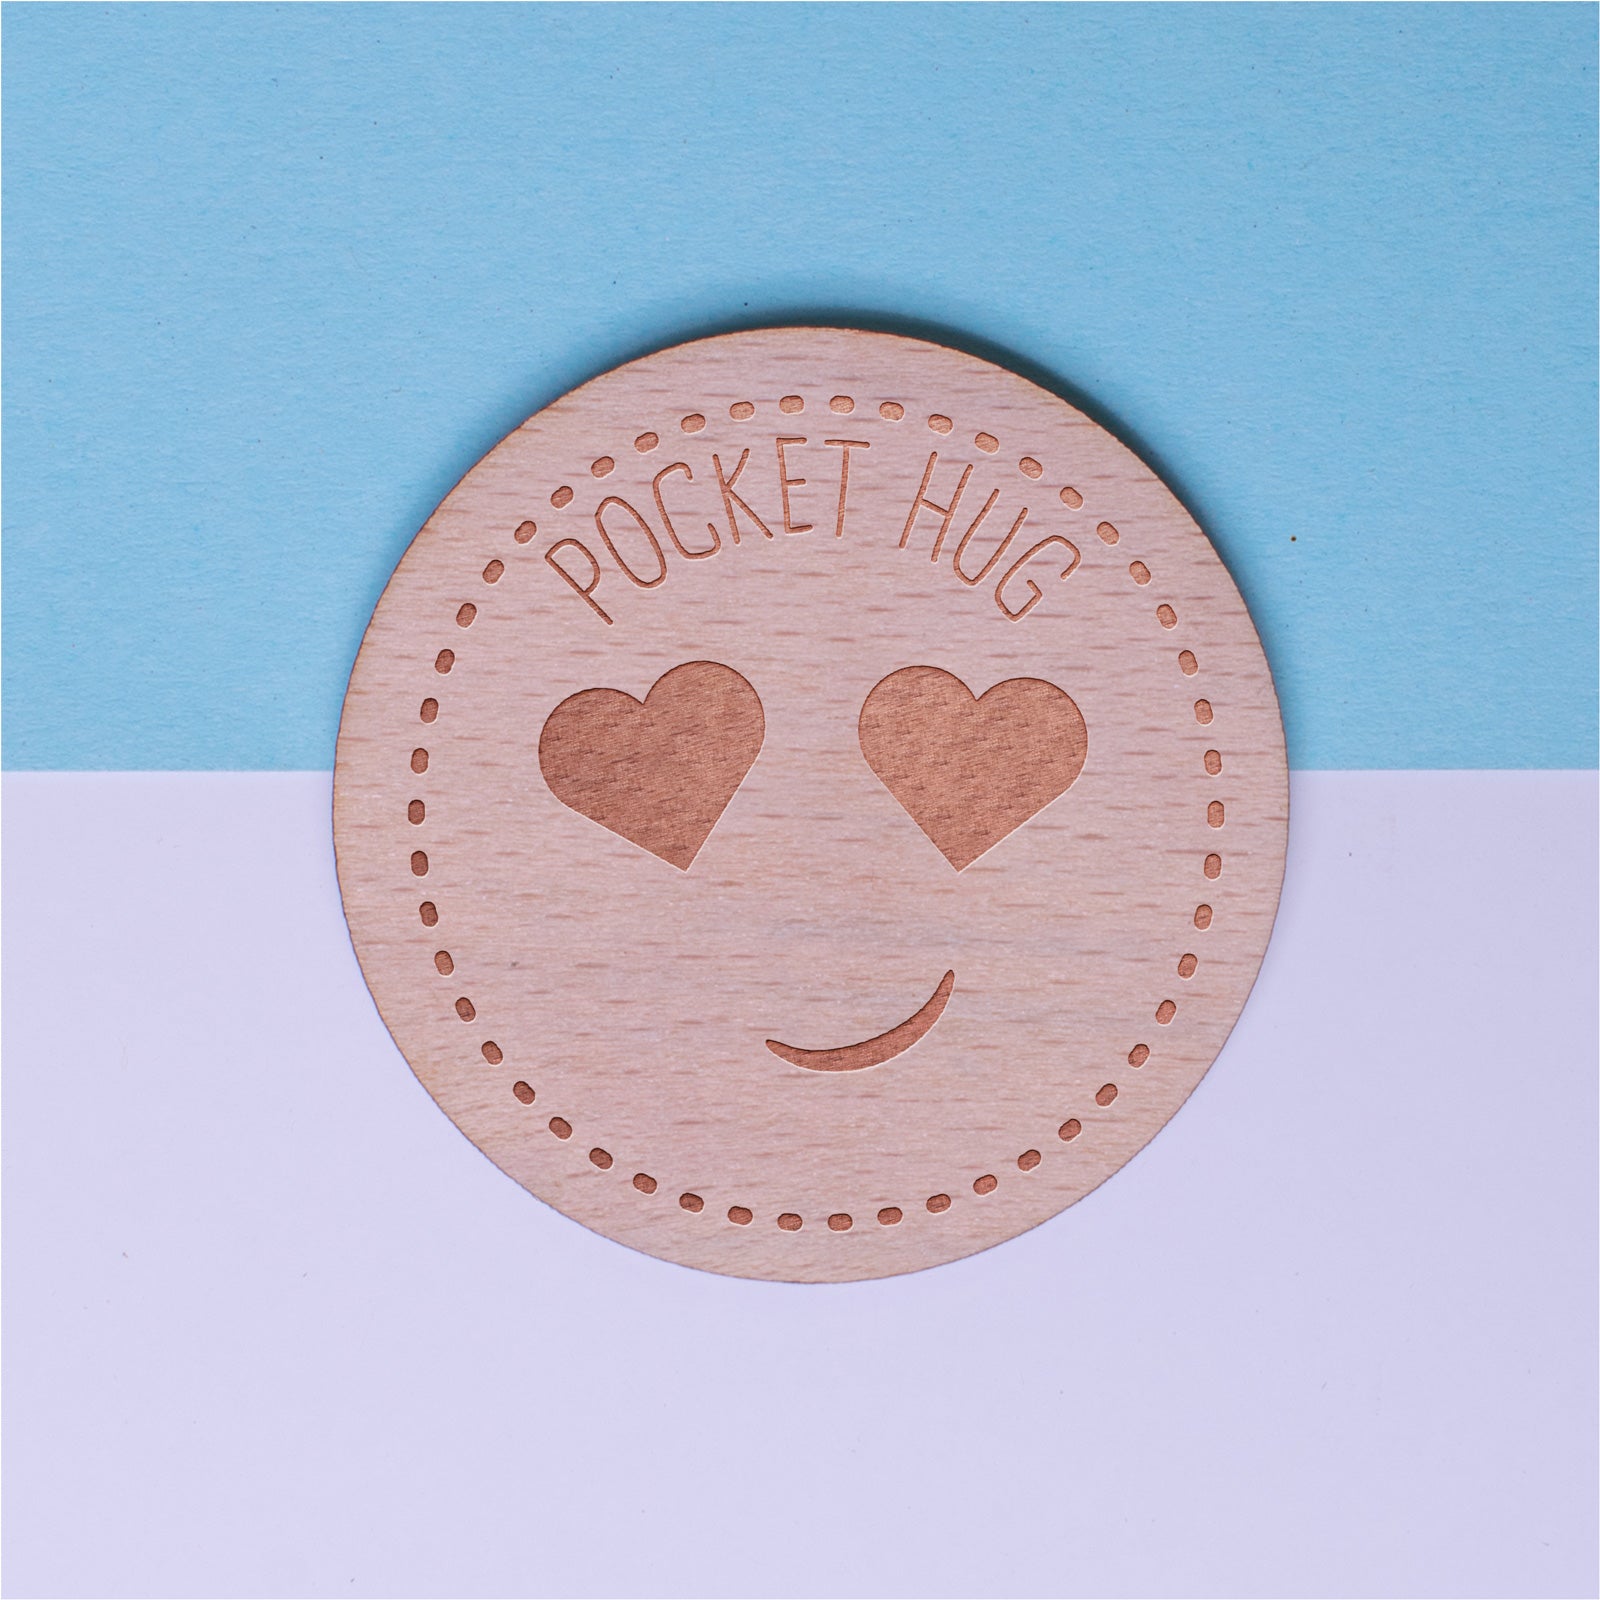 Wood Pocket Hug Tokens - Gift for Her for Him Friends Mum Dad - Smiley